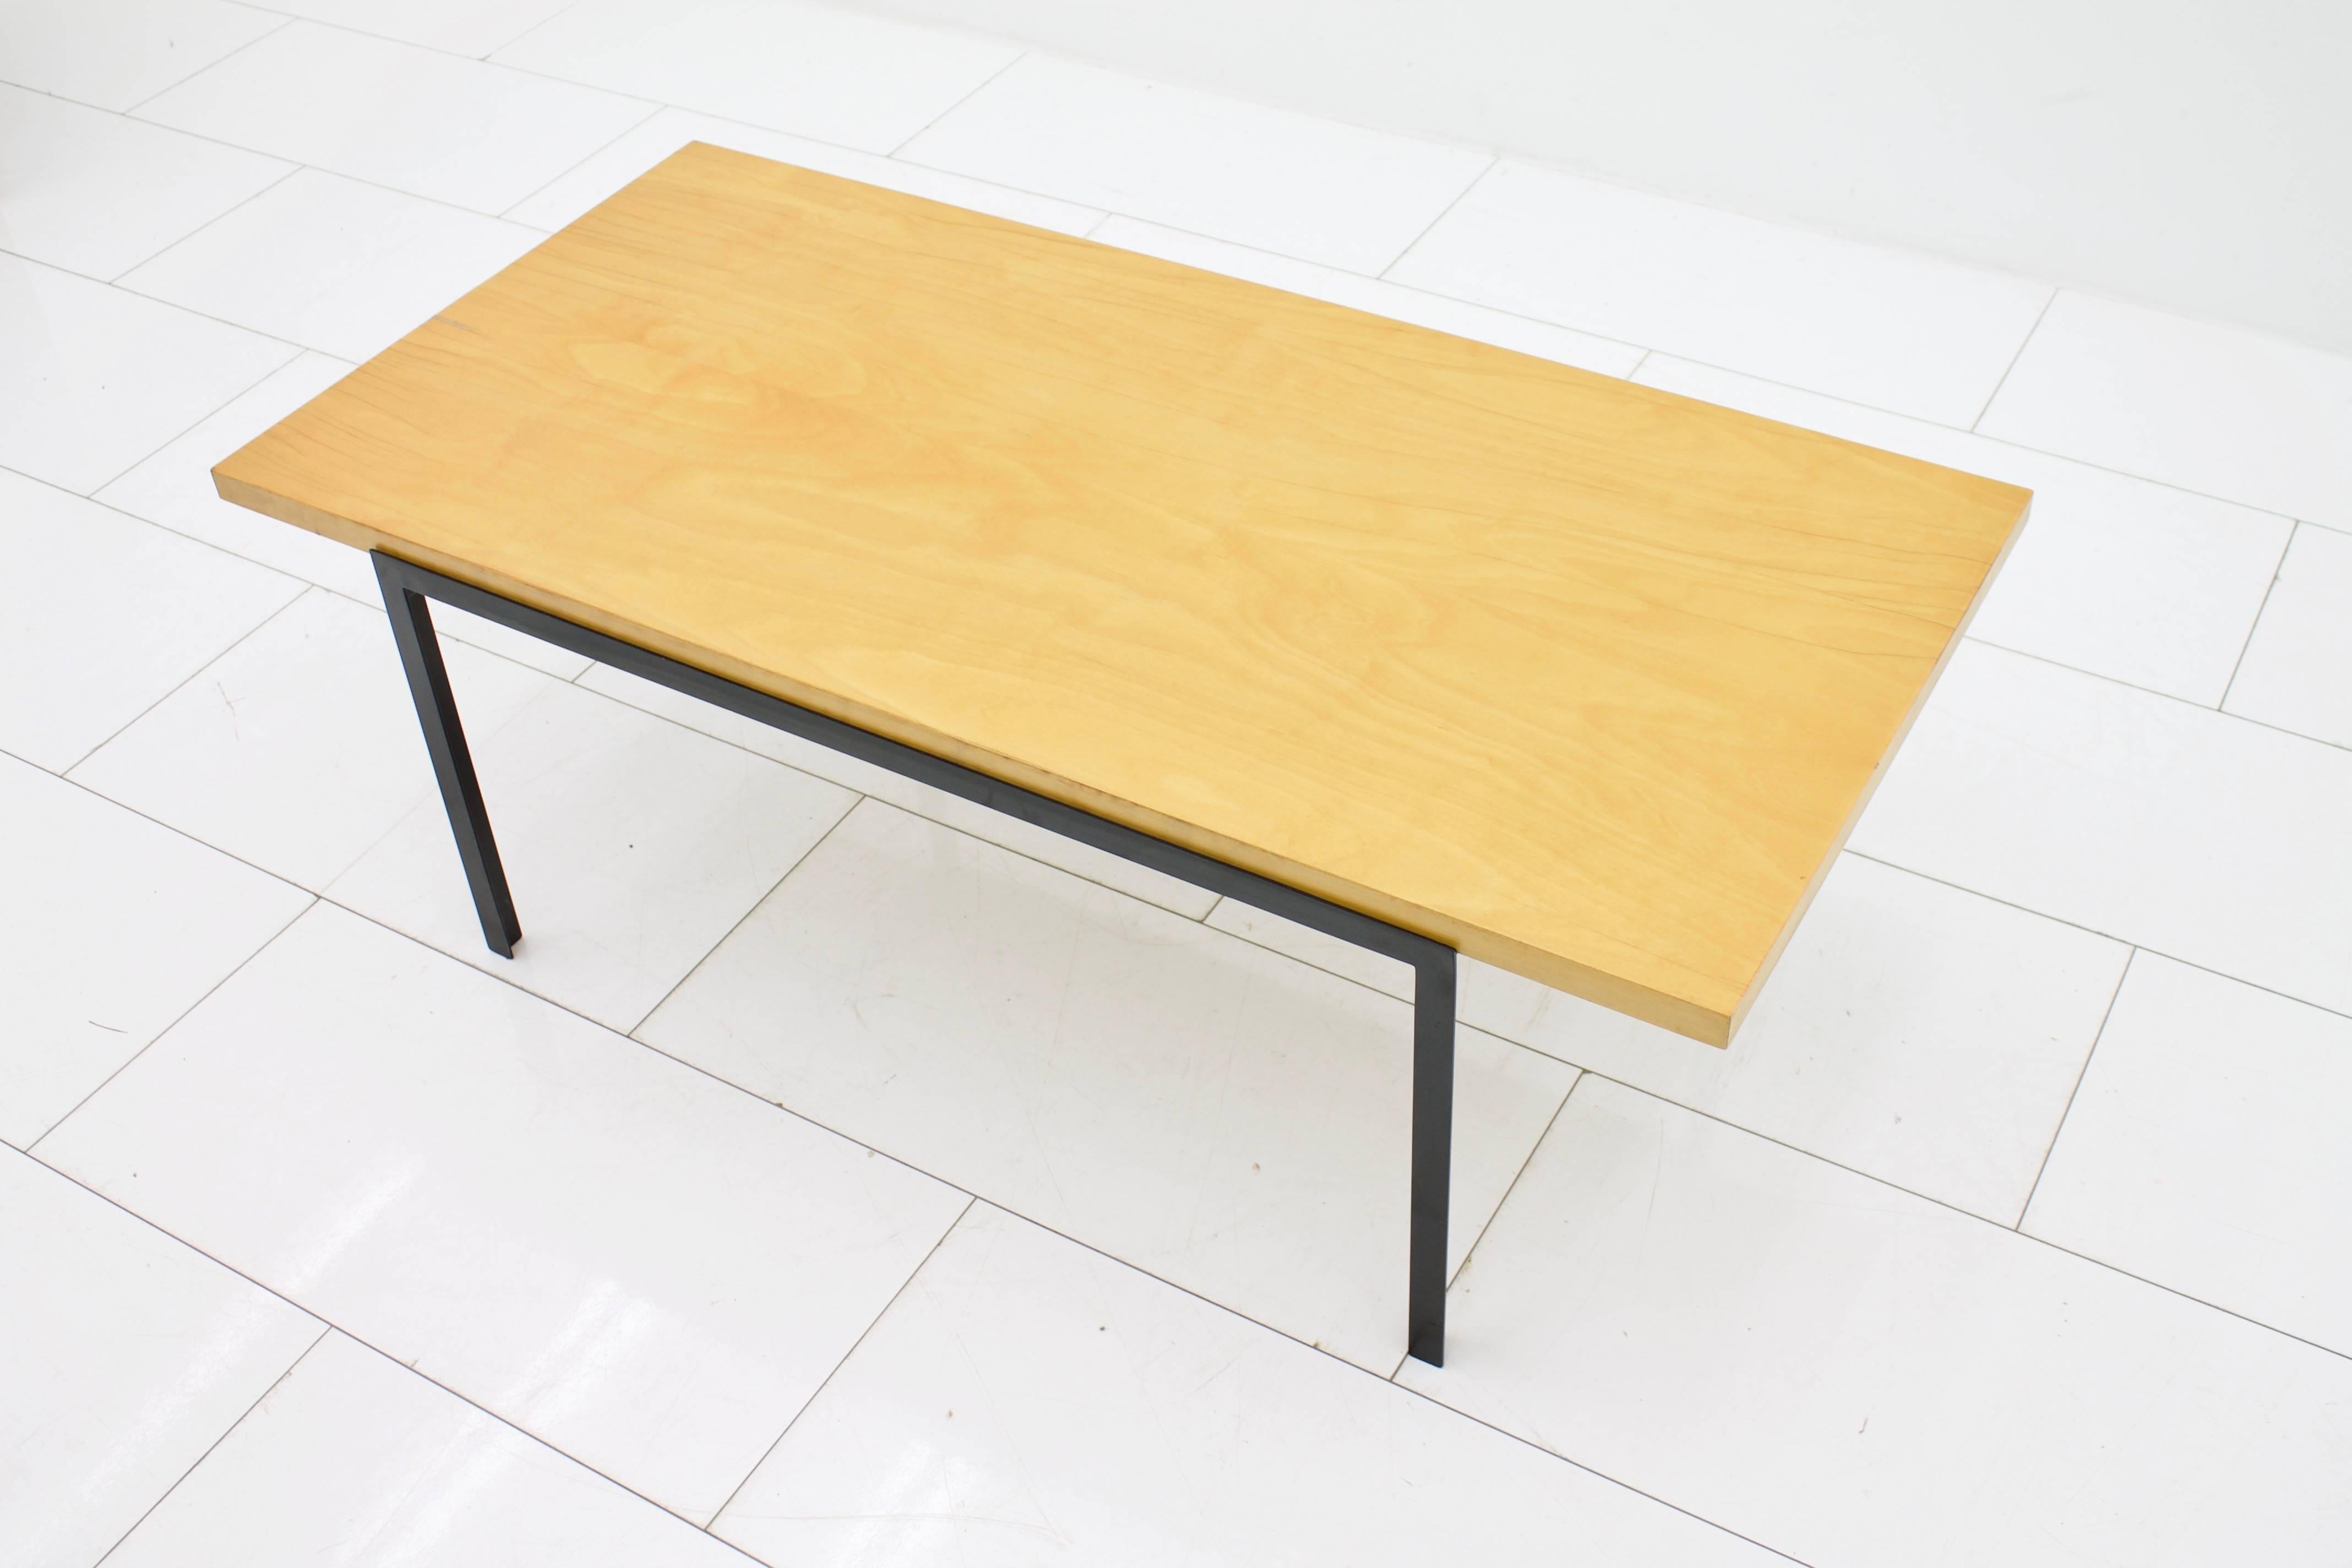 Florence Knoll T-angel coffee table, 1953, Knoll International.
Measures: W 114 cm, D 56 cm, H 41 cm.
Good condition with a small repair on the tabletop.

Worldwide shipping.